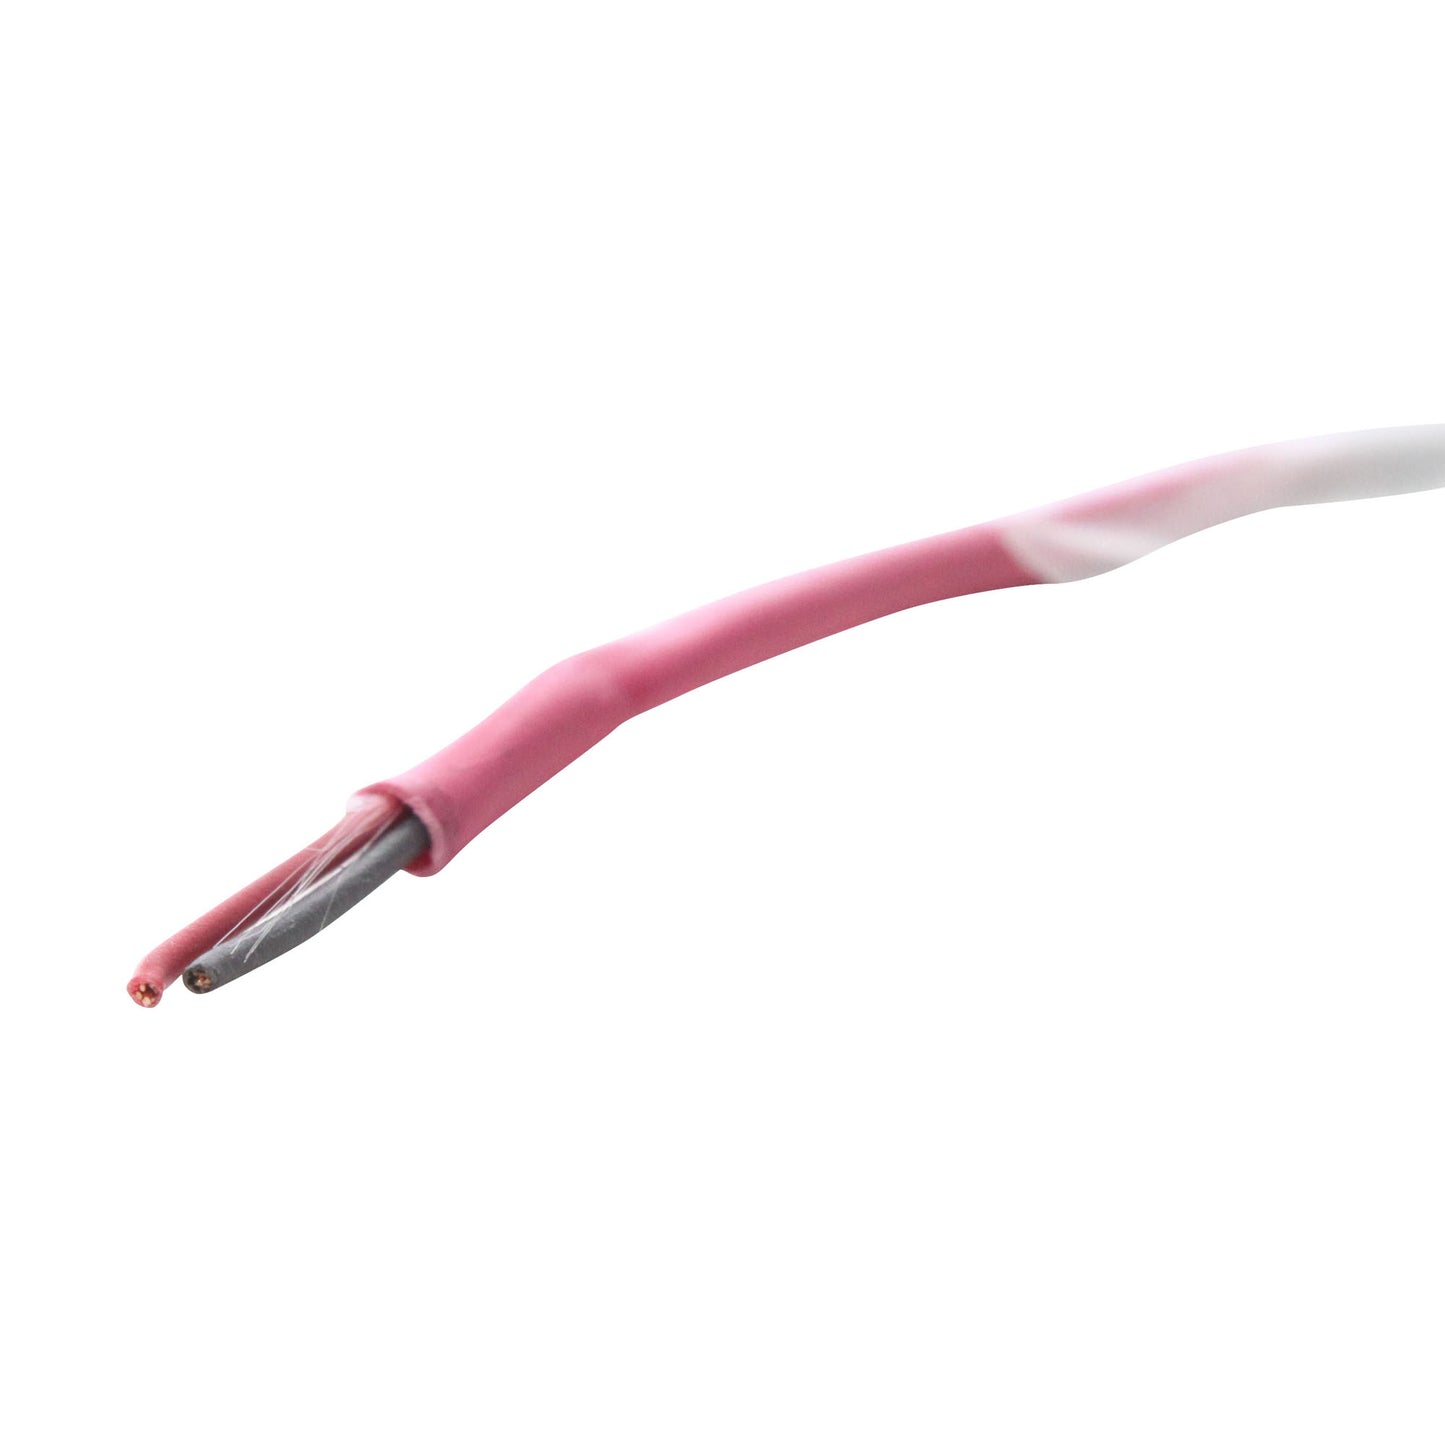 FASTER CABLE P222C-PNK